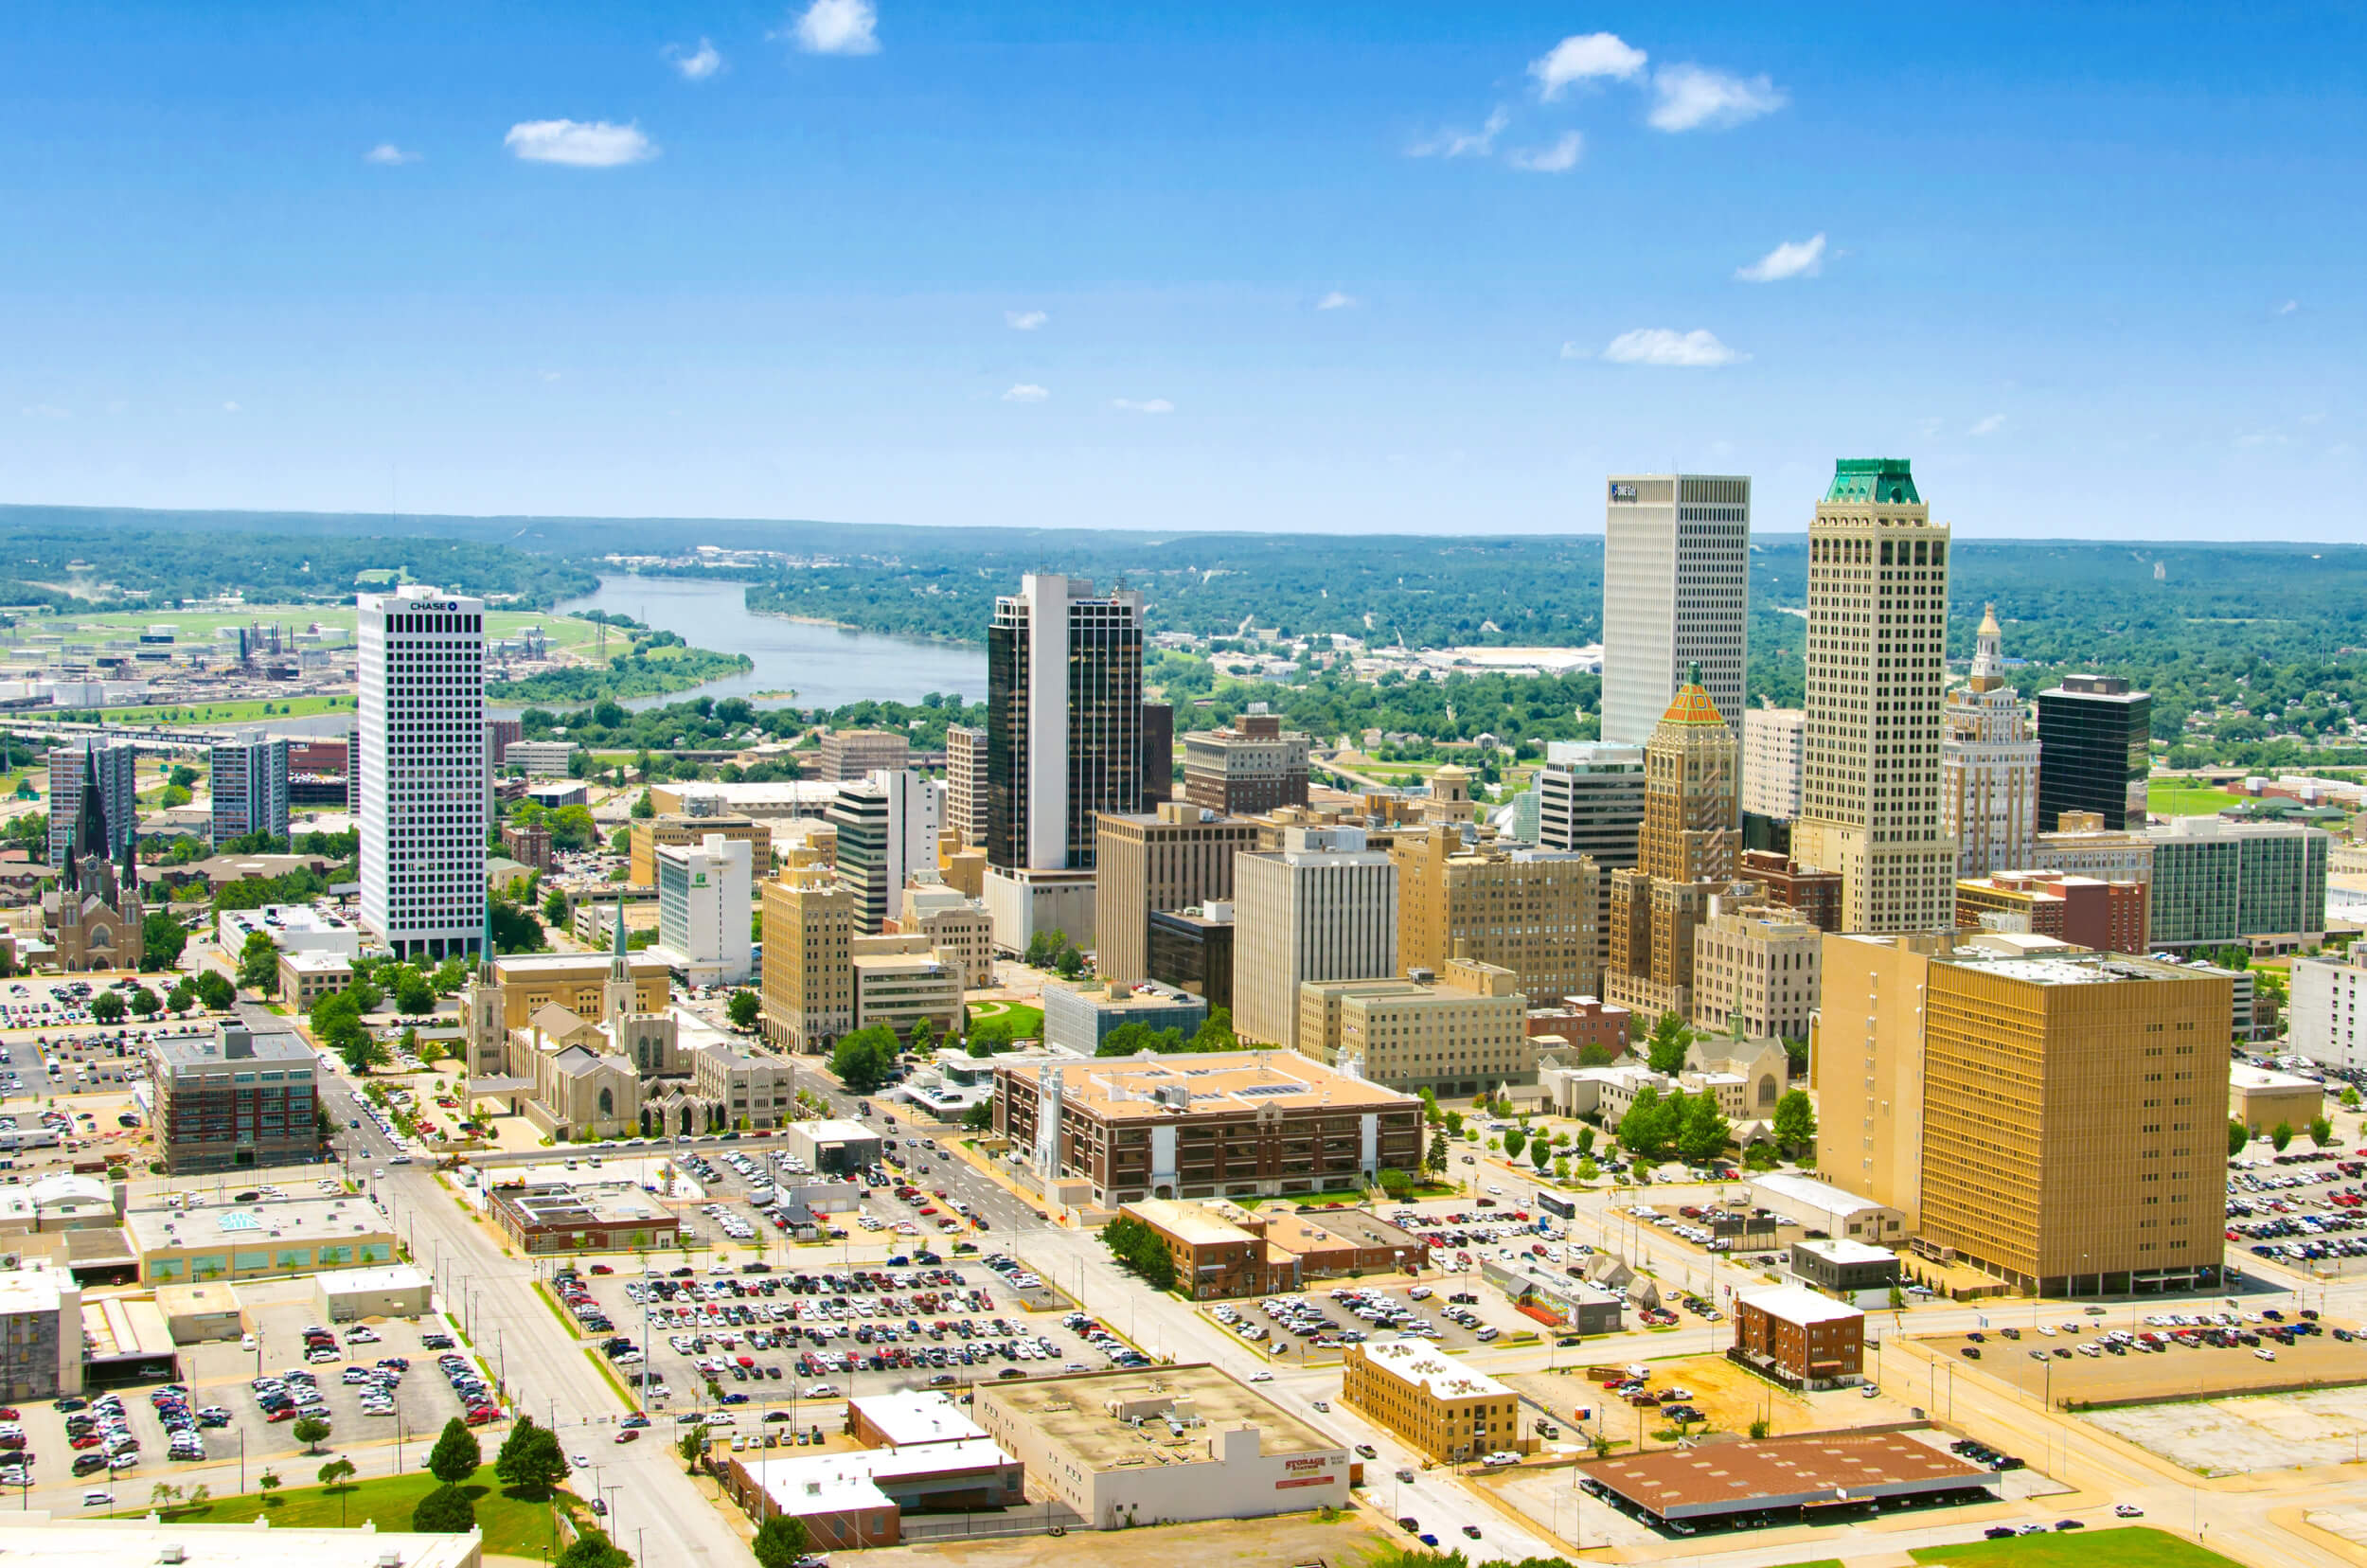 Aerial view of the city skyline in Tulsa, OK.